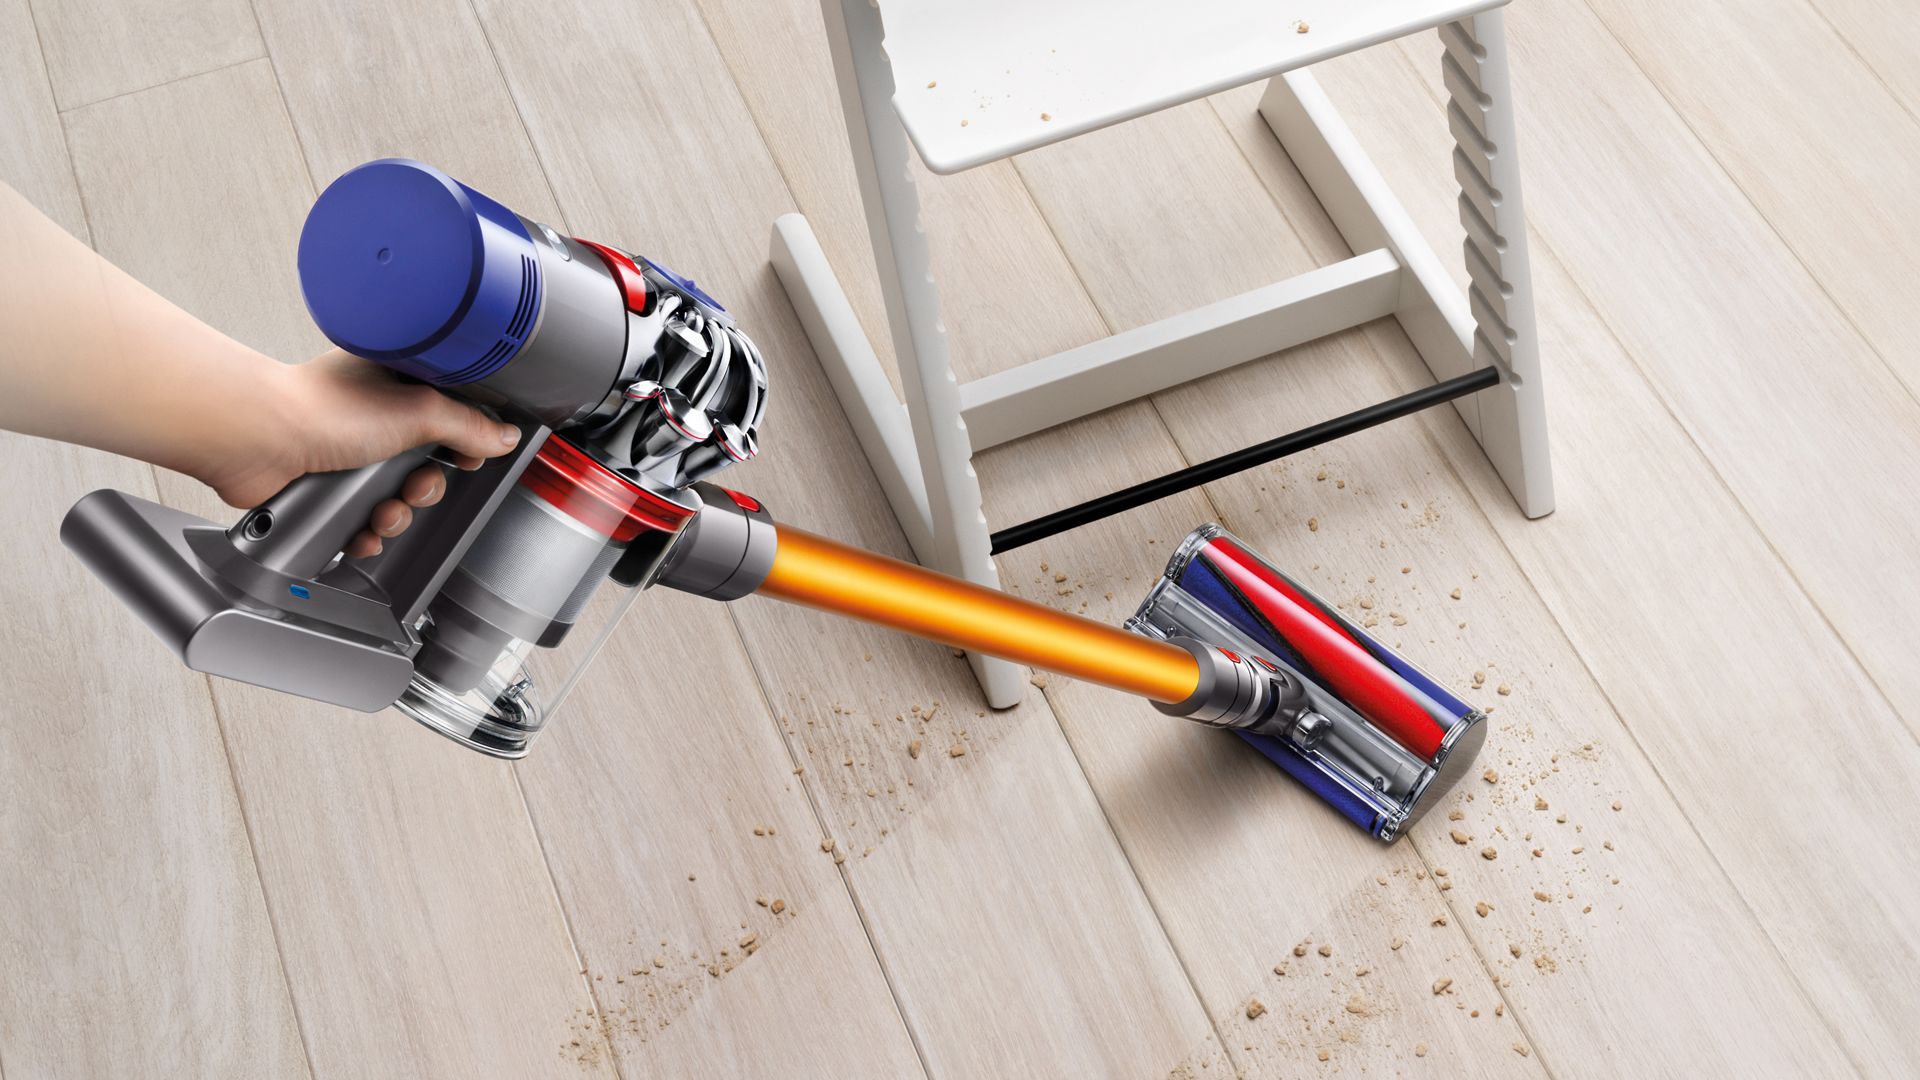 Dyson V8 Absolute Cord-free Vacuum Cleaner | Dyson India Shop